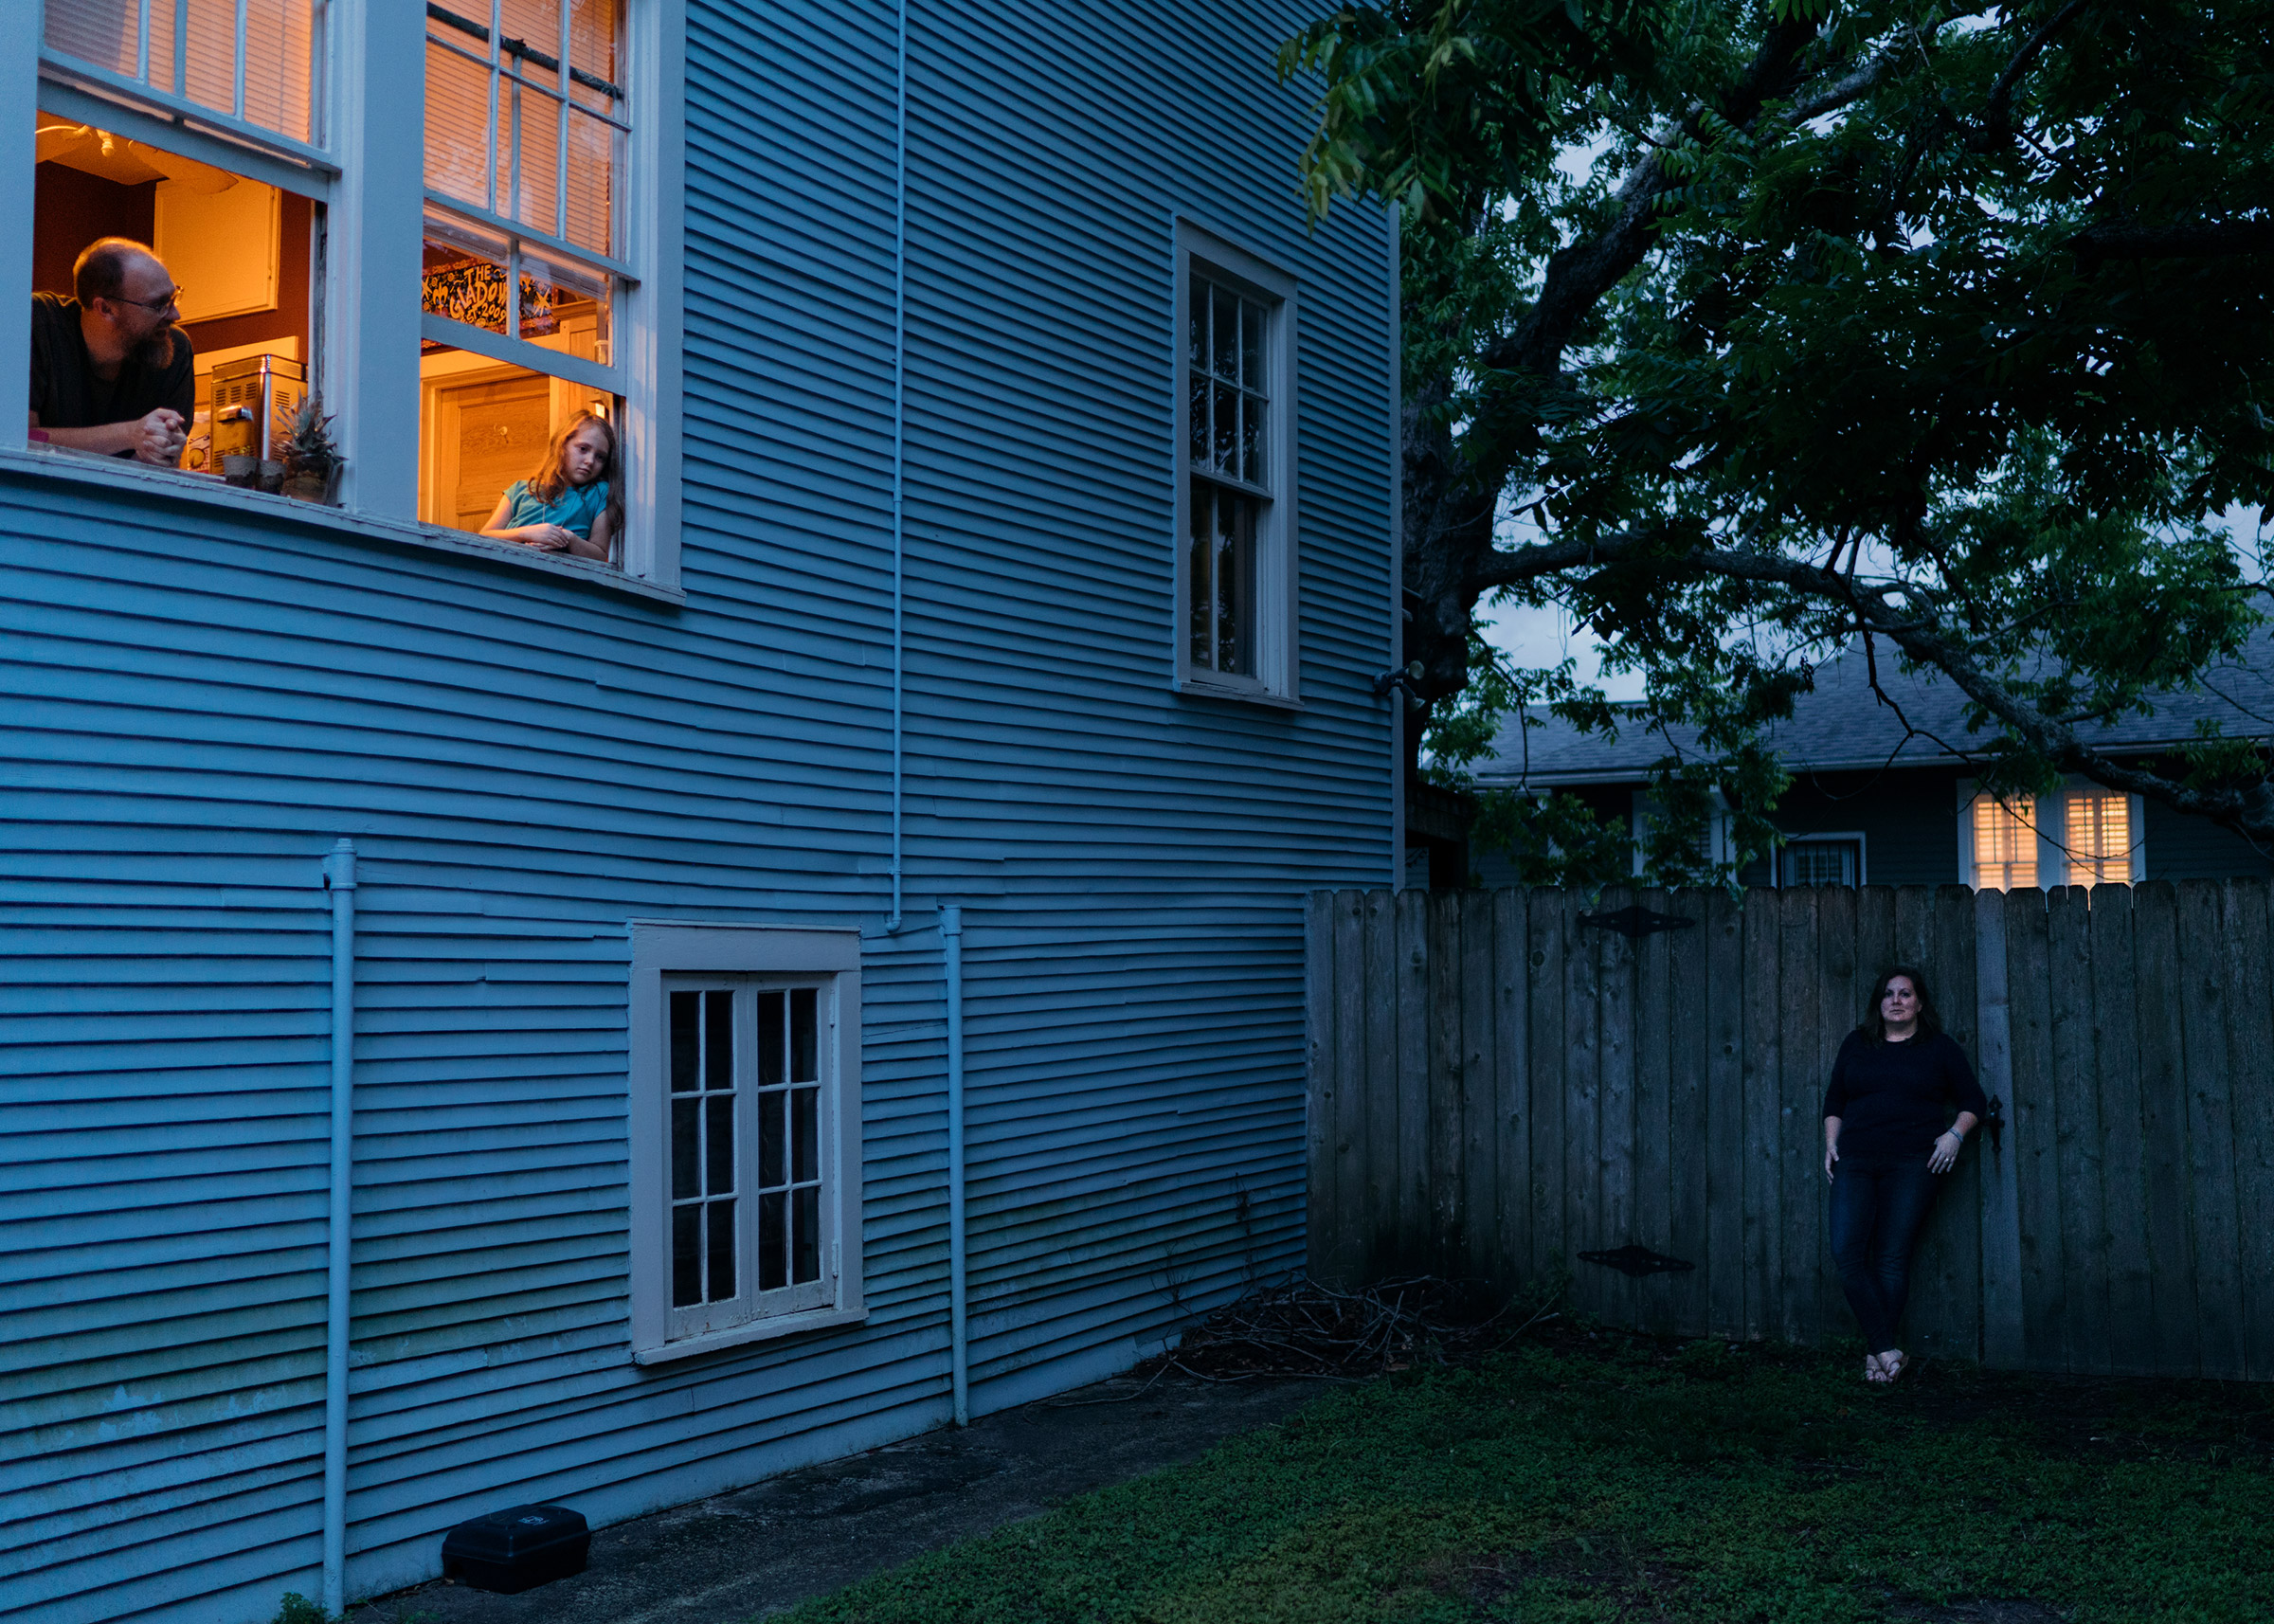 Caitrin Gladow at home with her family during the Covid-19 outbreak in New Orleans, La. on April 28, 2020. (Annie Flanagan for TIME)